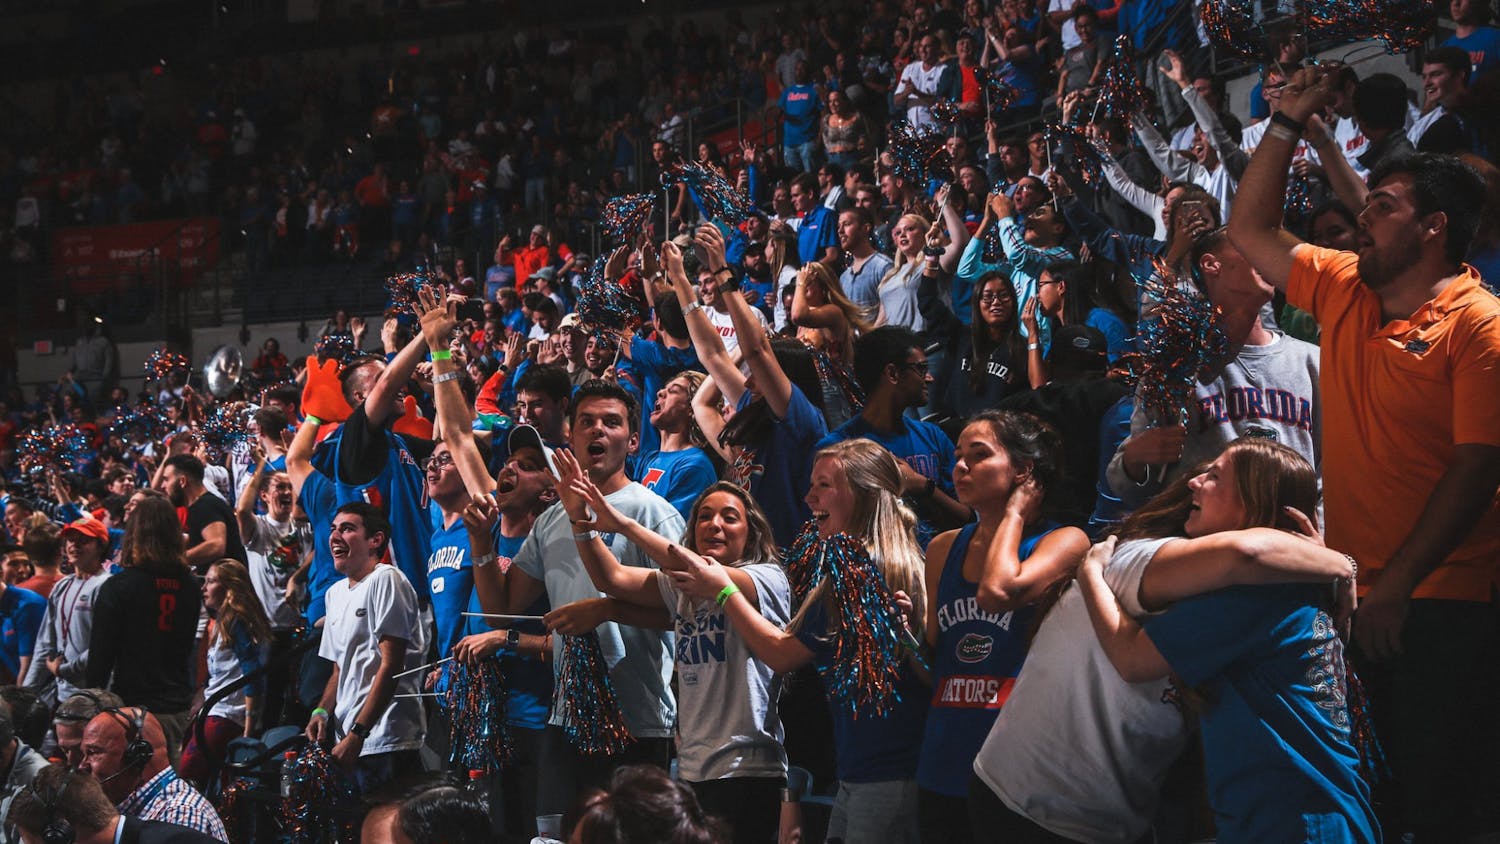 The student section is home to the Rowdy Reptiles, who ignite Florida home games’ intense atmosphere. 